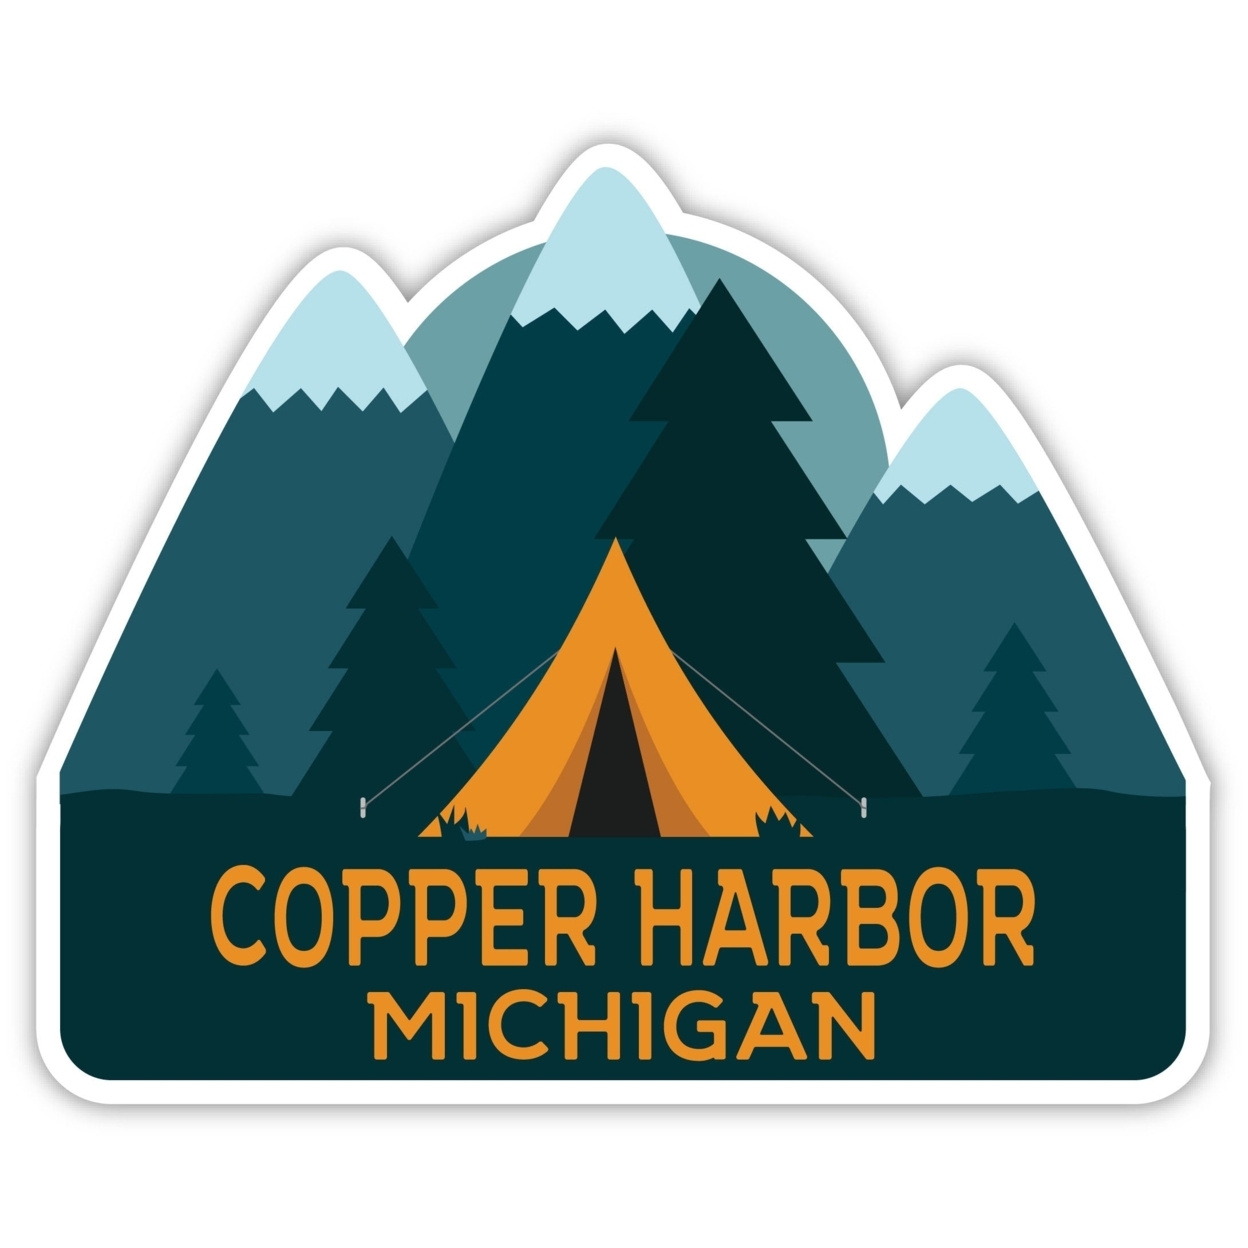 Copper Harbor Michigan Souvenir Decorative Stickers (Choose Theme And Size) - 4-Pack, 8-Inch, Adventures Awaits